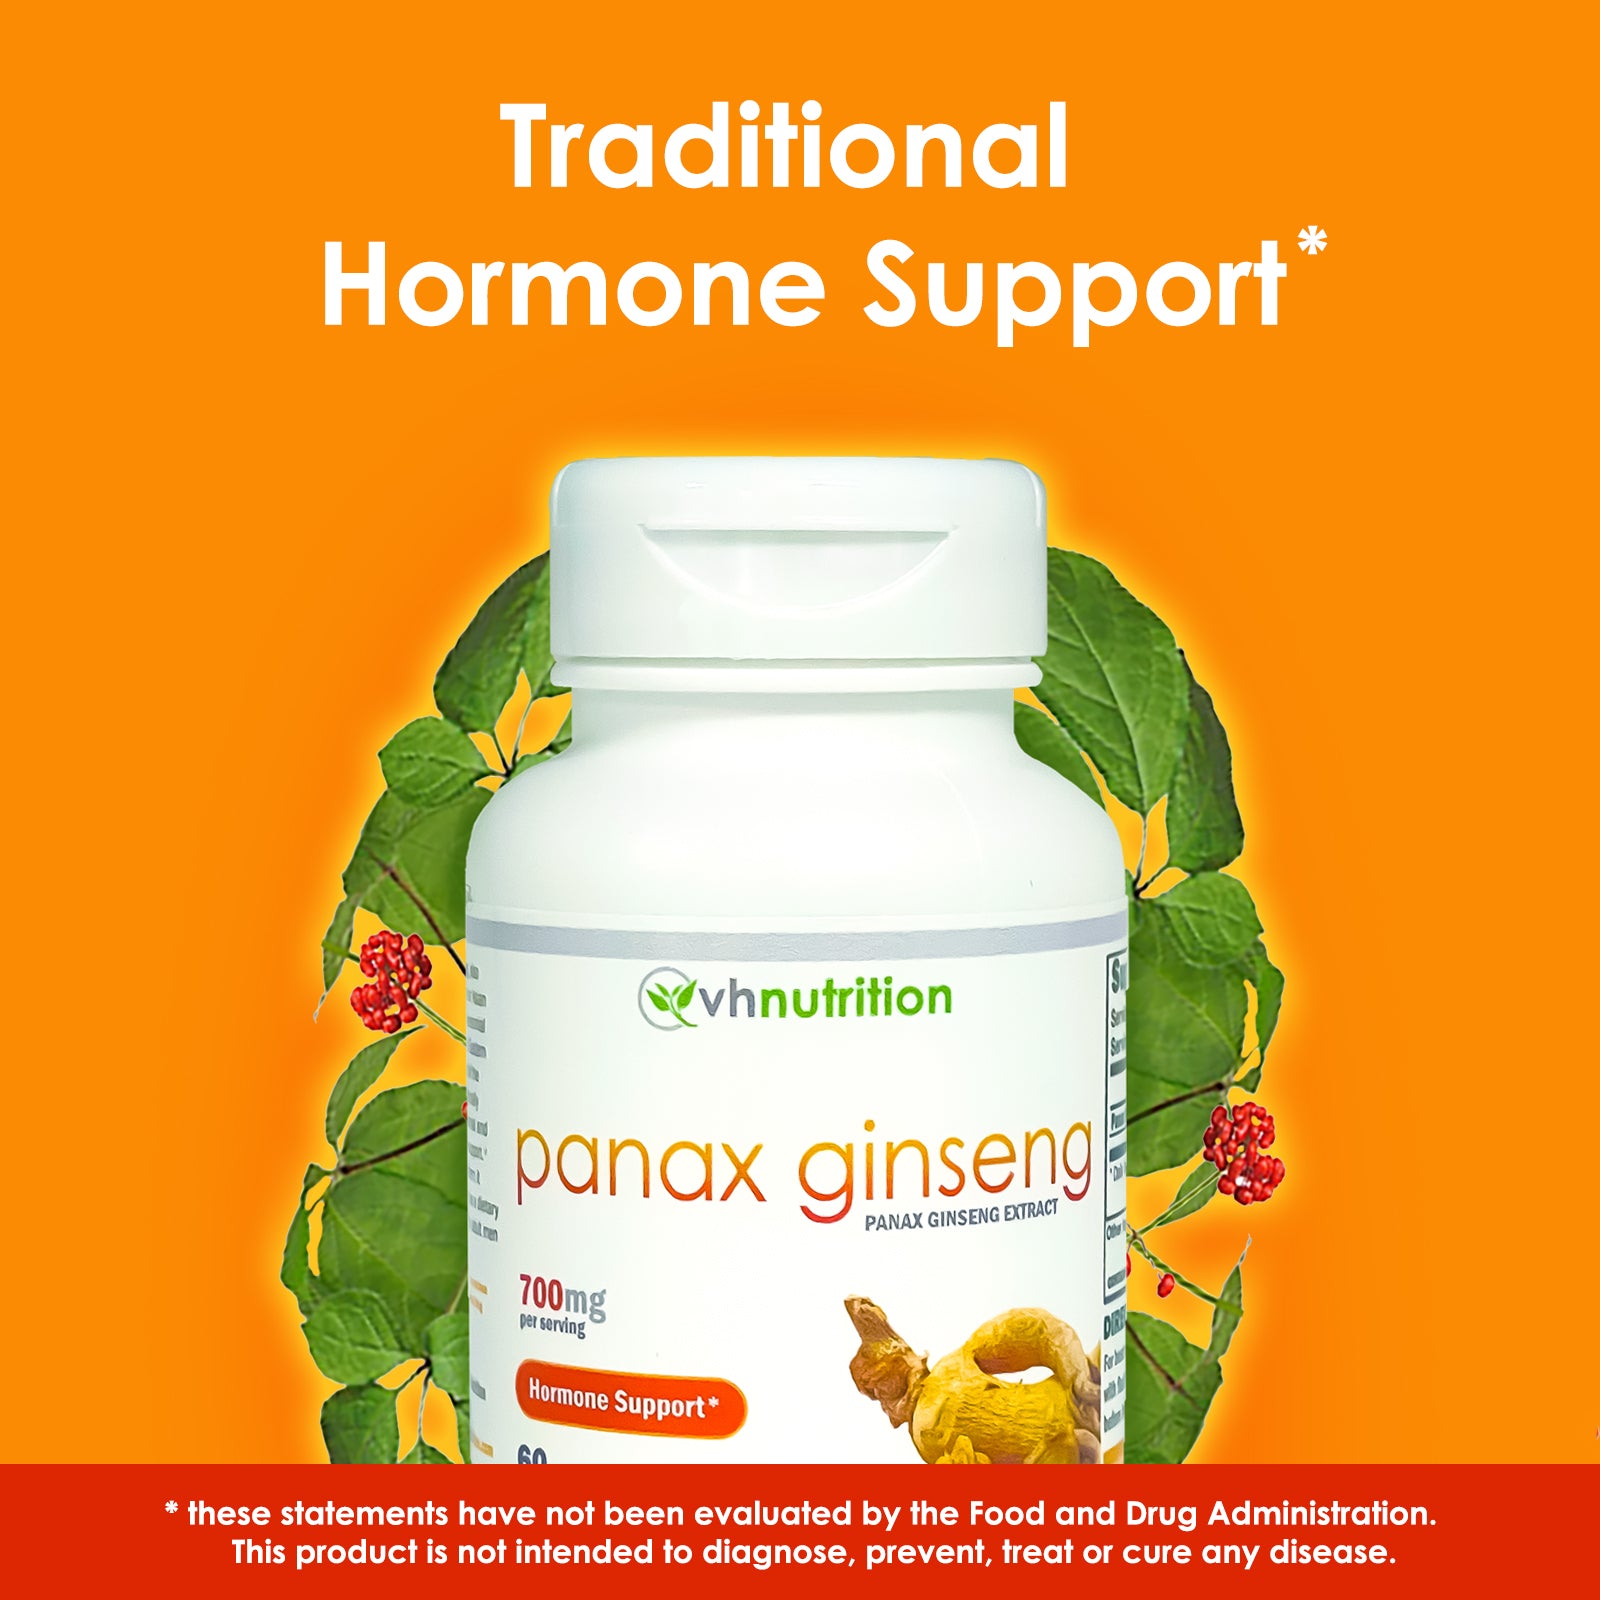 VH Nutrition PANAX GINSENG | Hormonal Support Supplement* | 700mg Per Serving | Standardized Panax ginseng Extract Powder | 60 Capsules